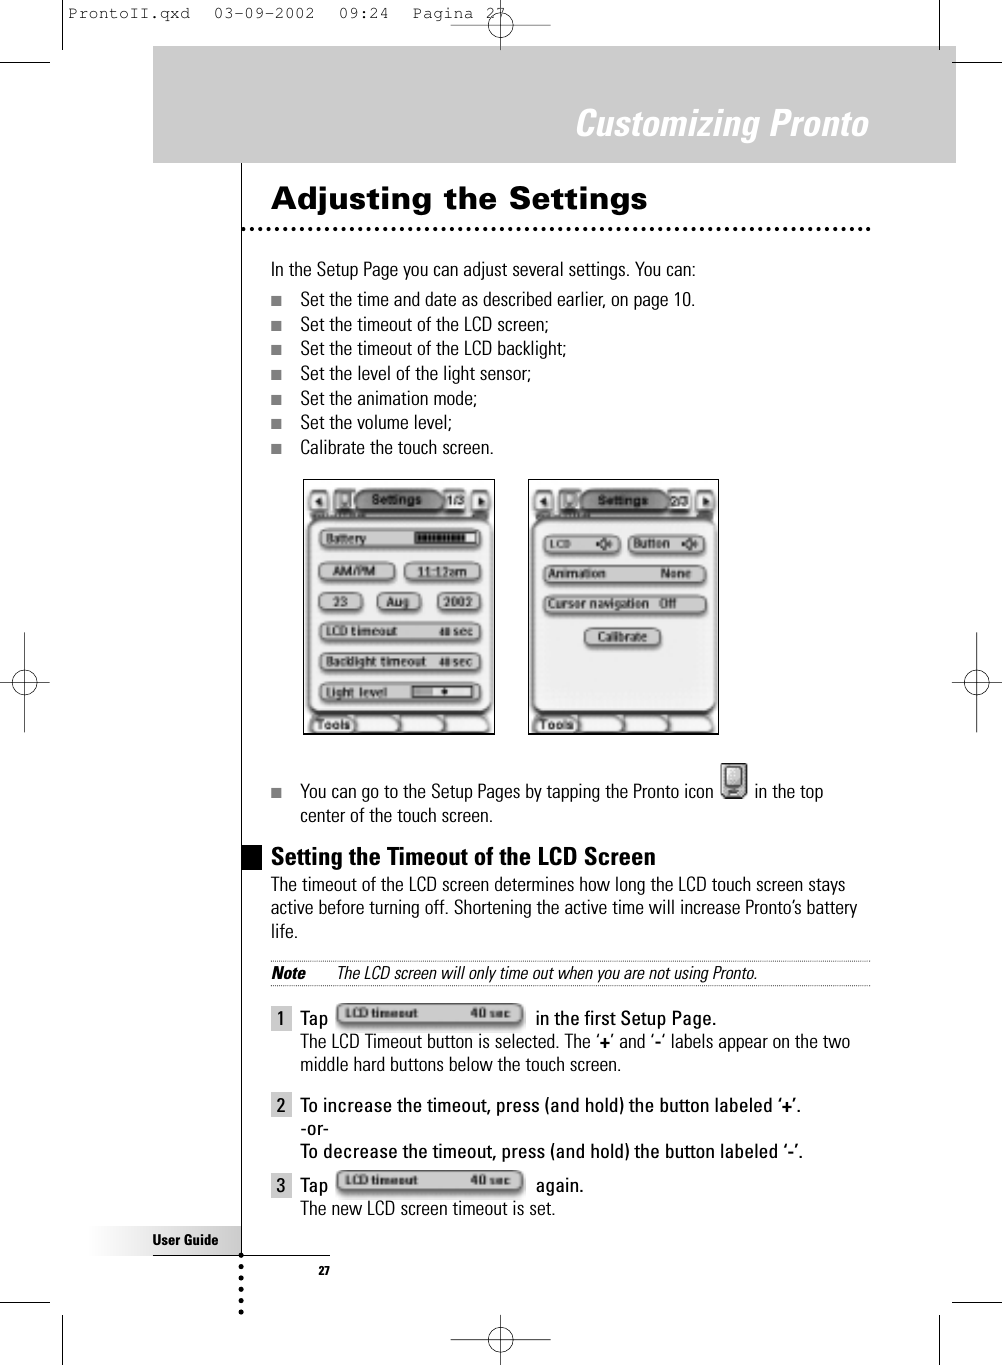 User Guide27Adjusting the SettingsIn the Setup Page you can adjust several settings. You can:■Set the time and date as described earlier, on page 10.■Set the timeout of the LCD screen;■Set the timeout of the LCD backlight;■Set the level of the light sensor;■Set the animation mode;■Set the volume level;■Calibrate the touch screen.■You can go to the Setup Pages by tapping the Pronto icon  in the topcenter of the touch screen.Setting the Timeout of the LCD ScreenThe timeout of the LCD screen determines how long the LCD touch screen staysactive before turning off. Shortening the active time will increase Pronto’s batterylife.Note The LCD screen will only time out when you are not using Pronto.1 Tap  in the first Setup Page.The LCD Timeout button is selected. The ‘+’ and ‘-‘ labels appear on the twomiddle hard buttons below the touch screen.2 To increase the timeout, press (and hold) the button labeled ‘+’.-or-To decrease the timeout, press (and hold) the button labeled ‘-’.3 Tap again.The new LCD screen timeout is set.Customizing ProntoProntoII.qxd  03-09-2002  09:24  Pagina 27